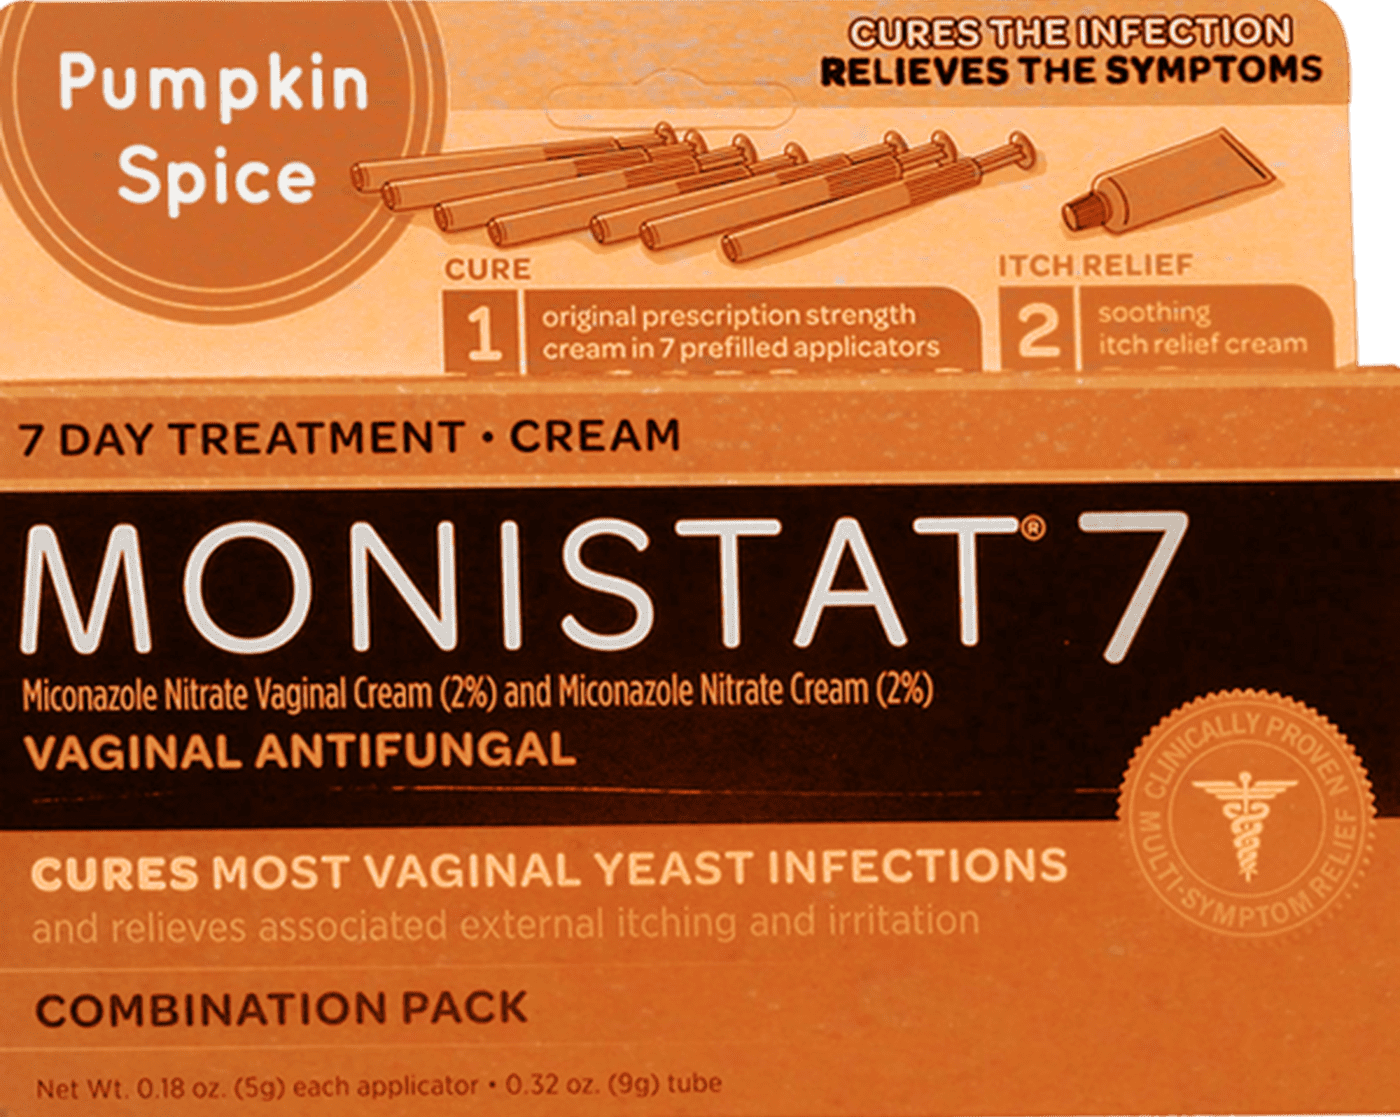 orange - Cures The Infection Relieves The Symptoms Pumpkin Spice Itch Relief Cure 1 original prescription strength cream in 7 prefilled applicators 2 soothing itch relief cream 7 Day Treatment Cream Monistat 7 Miconazole Nitrate Vaginal Cream 2% and Micon